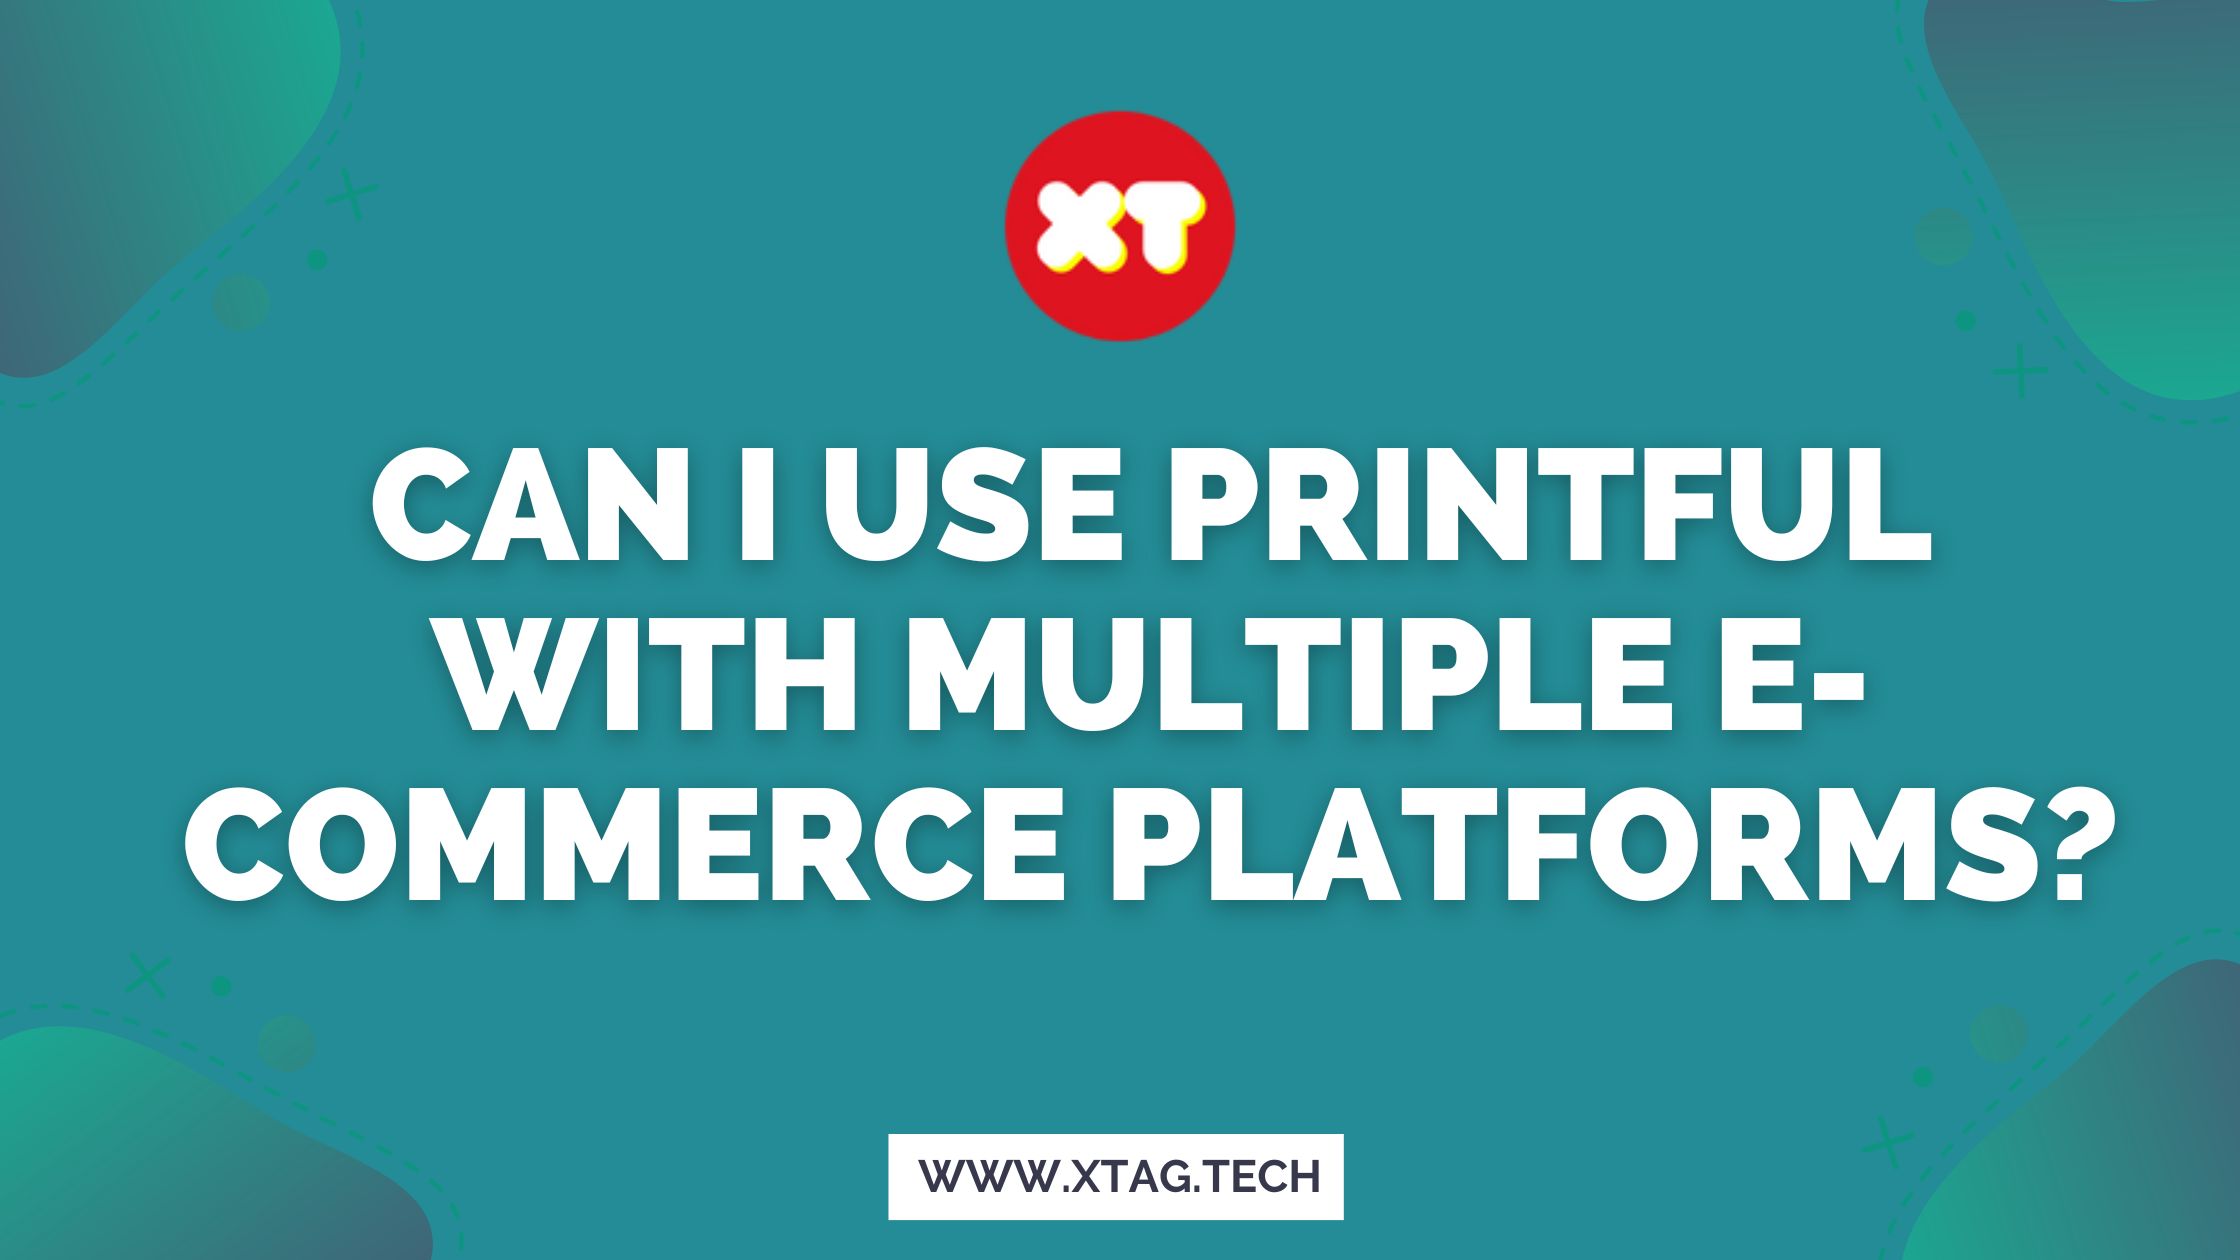 Can I Use Printful With Multiple E-Commerce Platforms?